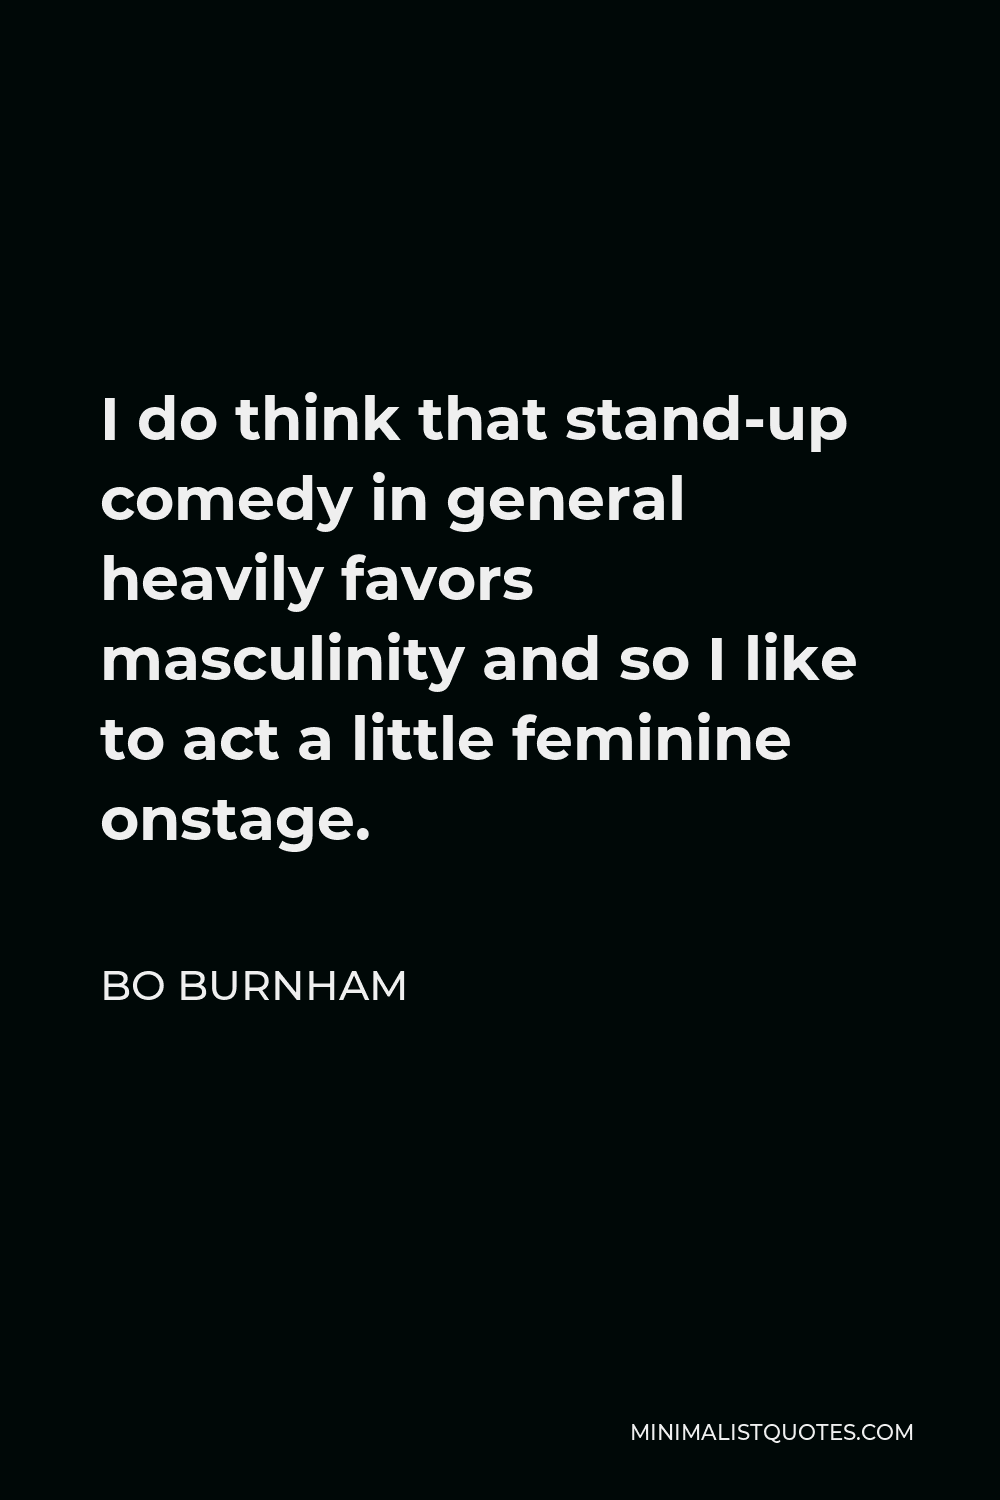 Bo Burnham Quote - I do think that stand-up comedy in general heavily favors masculinity and so I like to act a little feminine onstage.